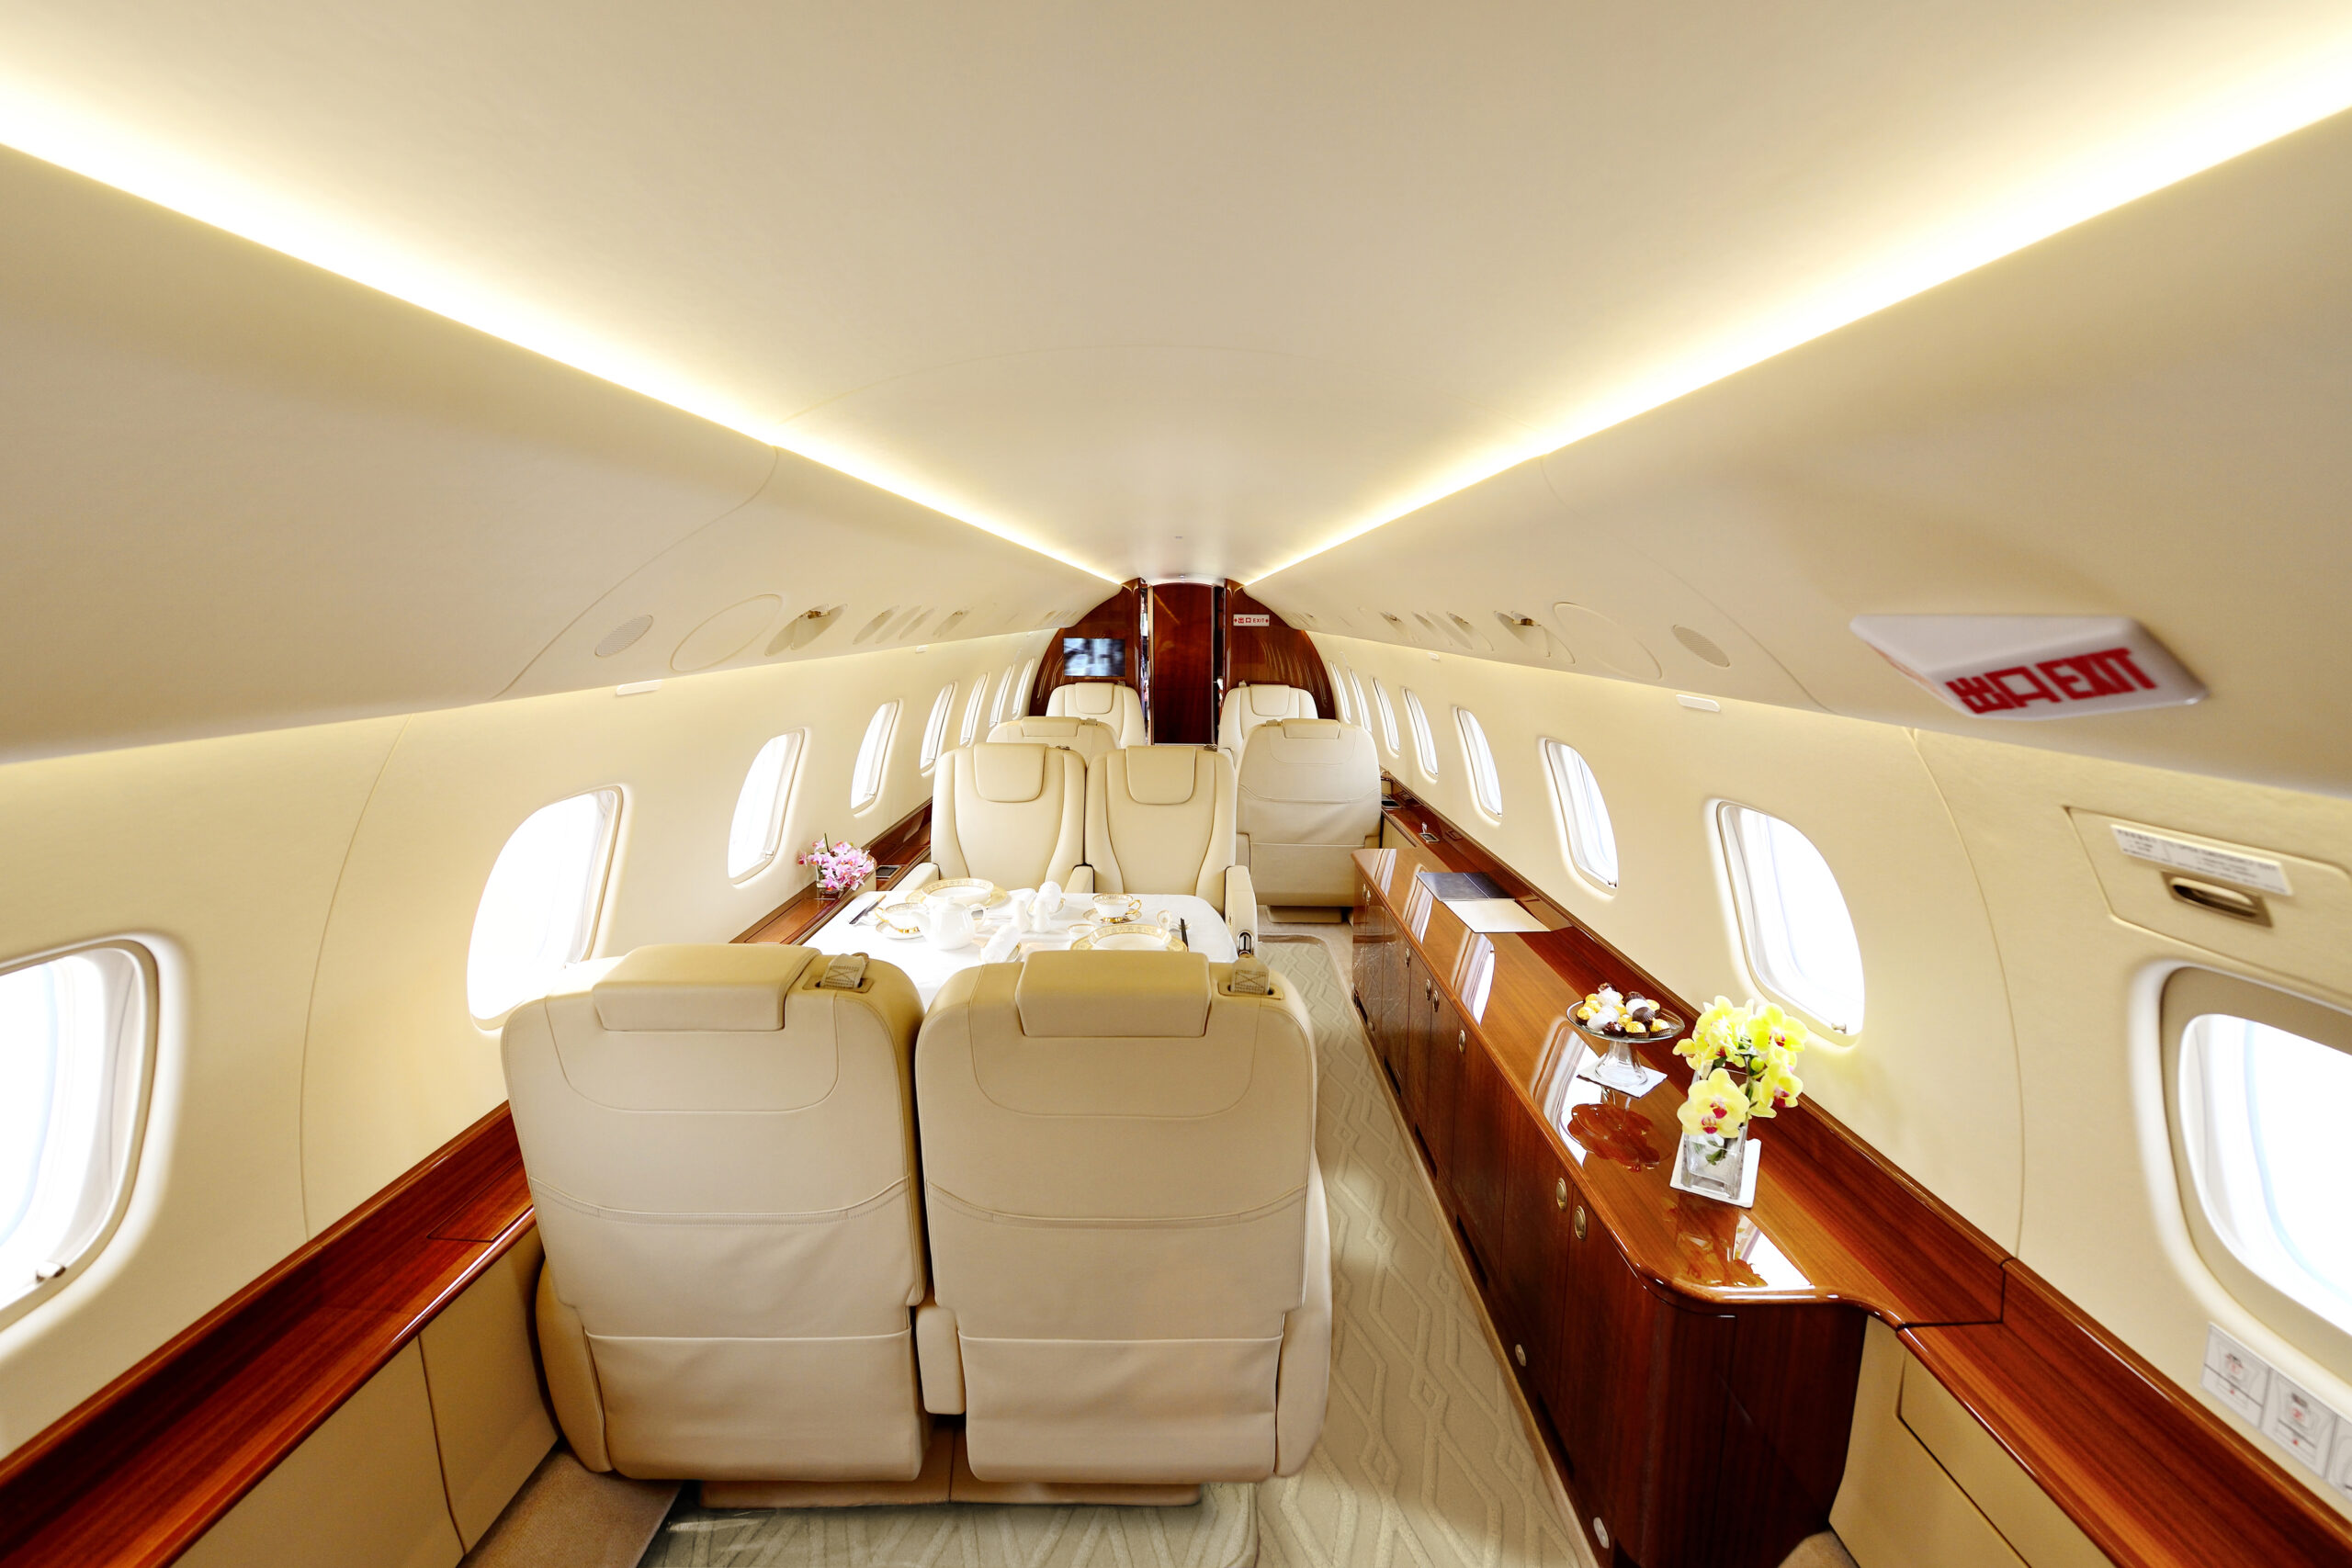 Luxury Carpet Studio realizes bespoke luxury carpets for private jets